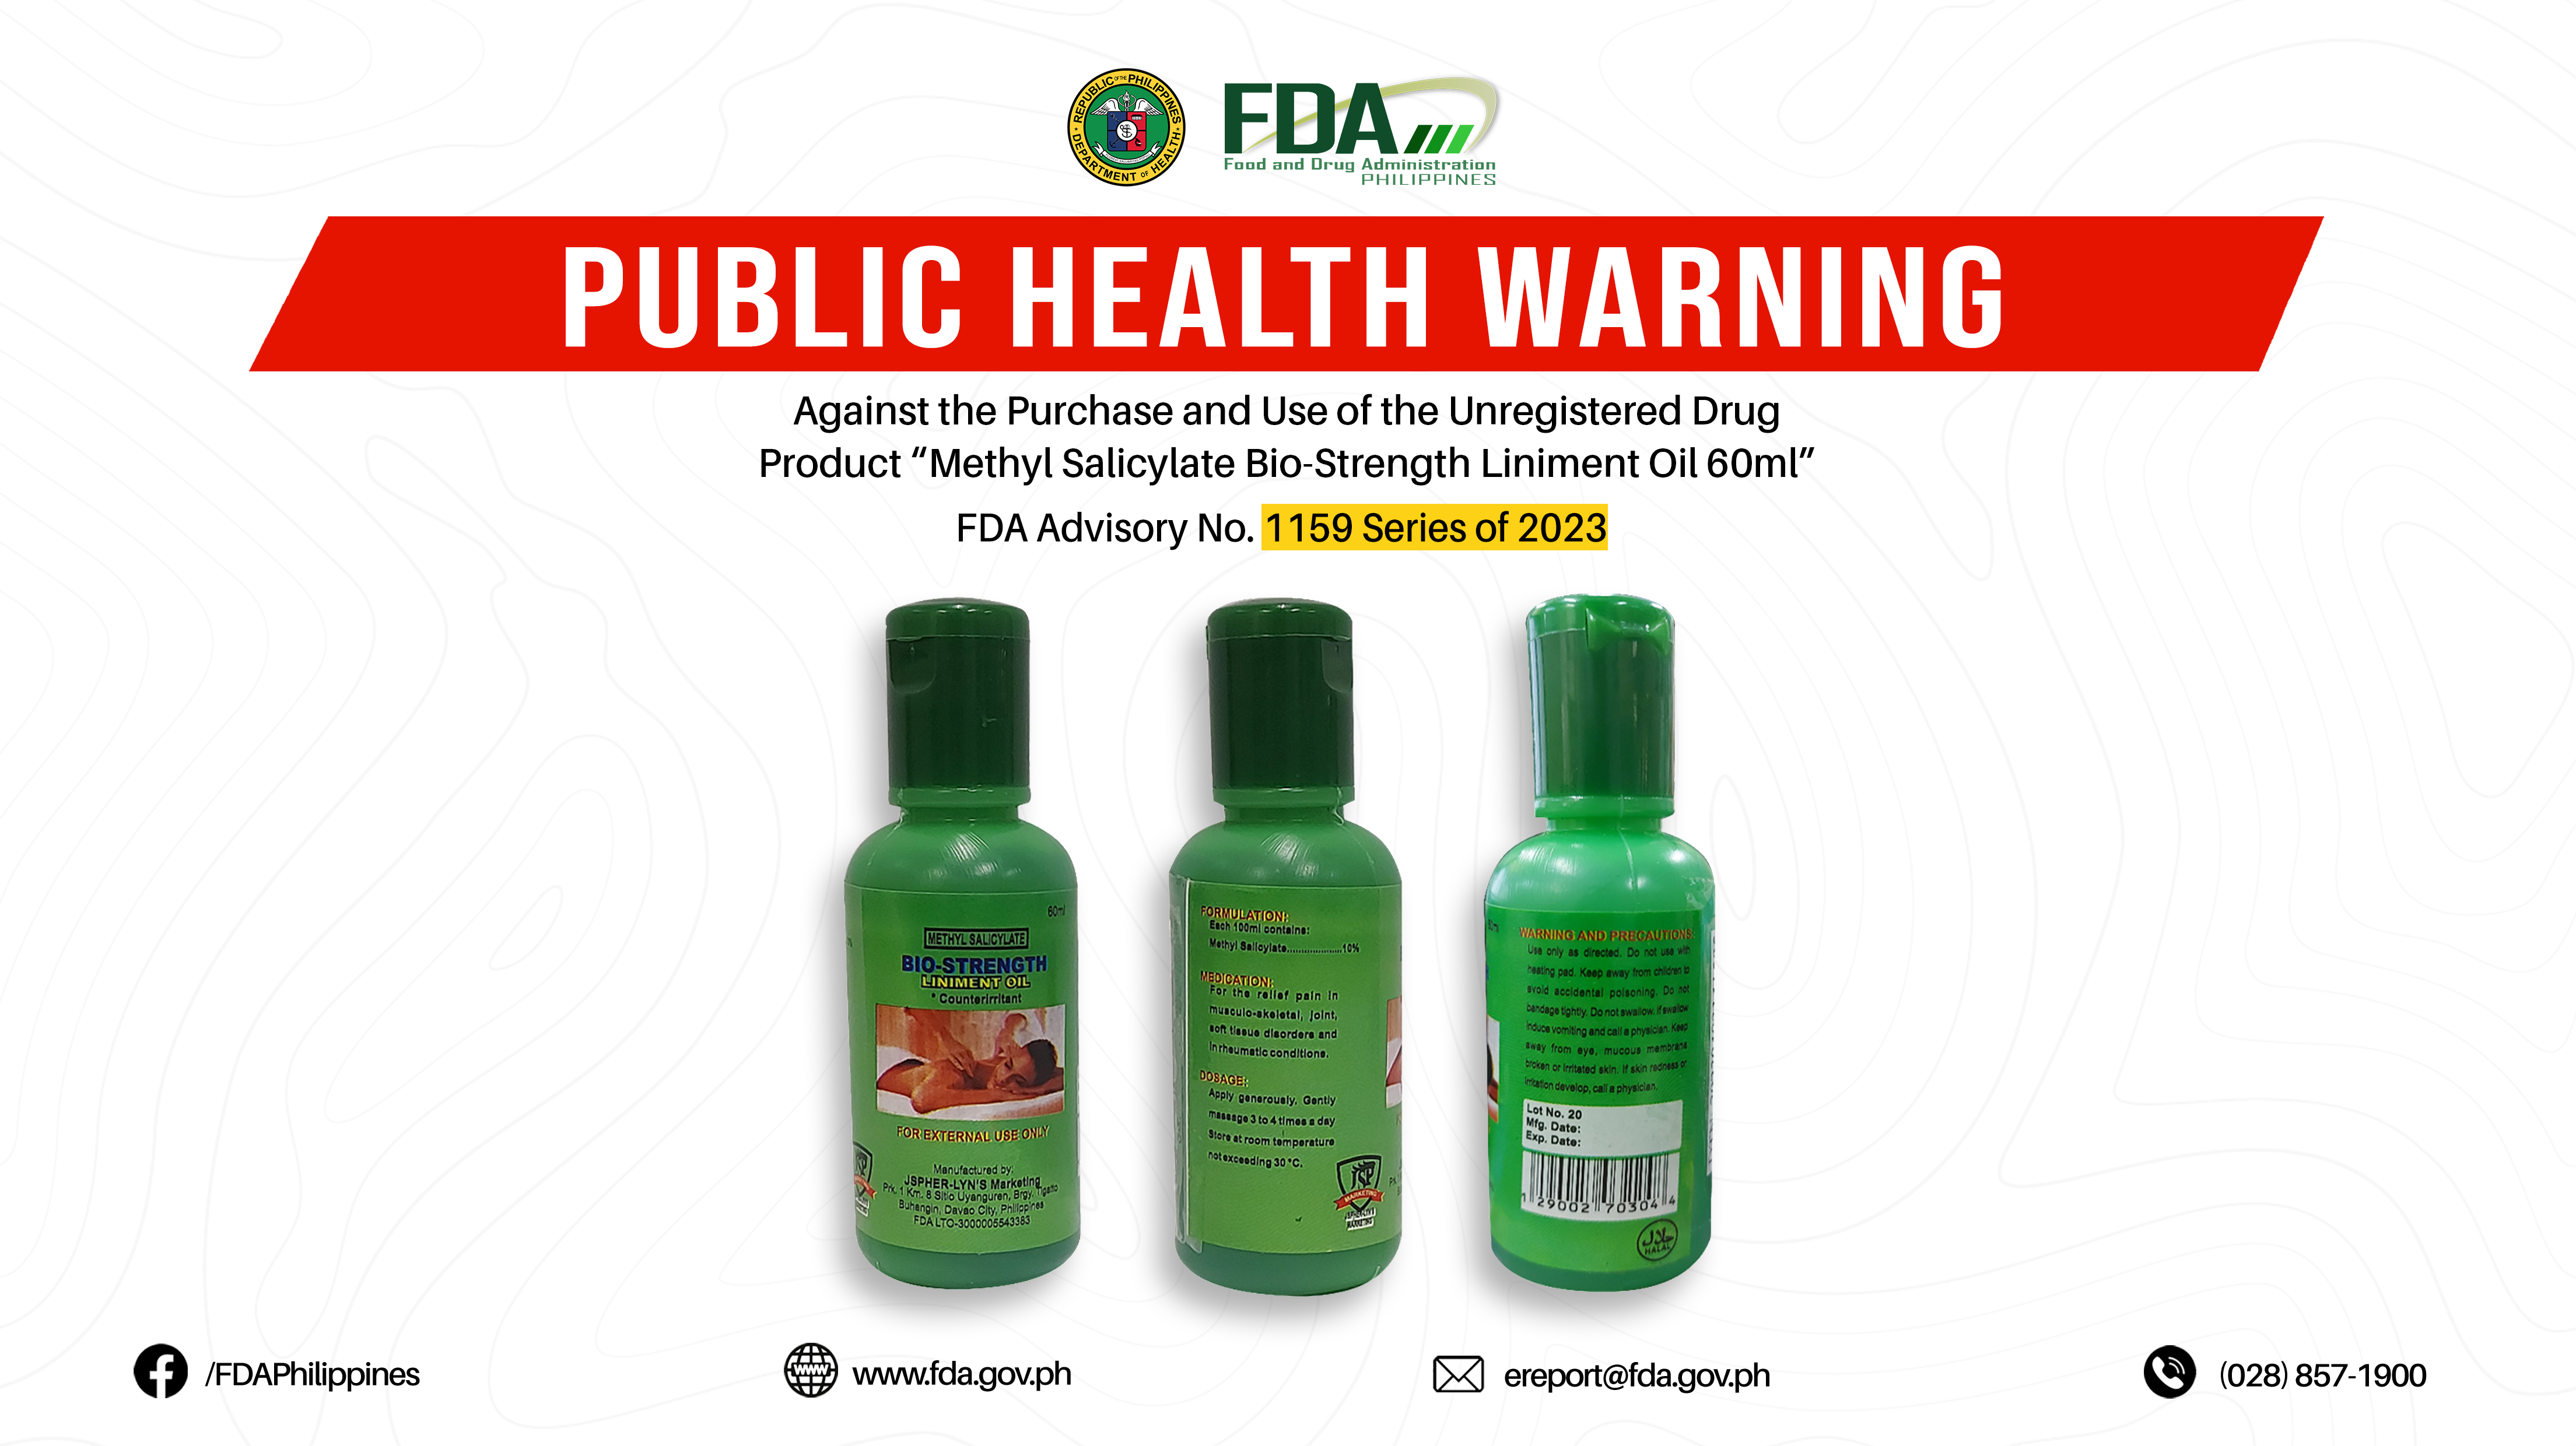 FDA Advisory No.2023-1159 || Public Health Warning Against the Purchase and Use of the Unregistered Drug Product “Methyl Salicylate Bio-Strength Liniment Oil 60ml”